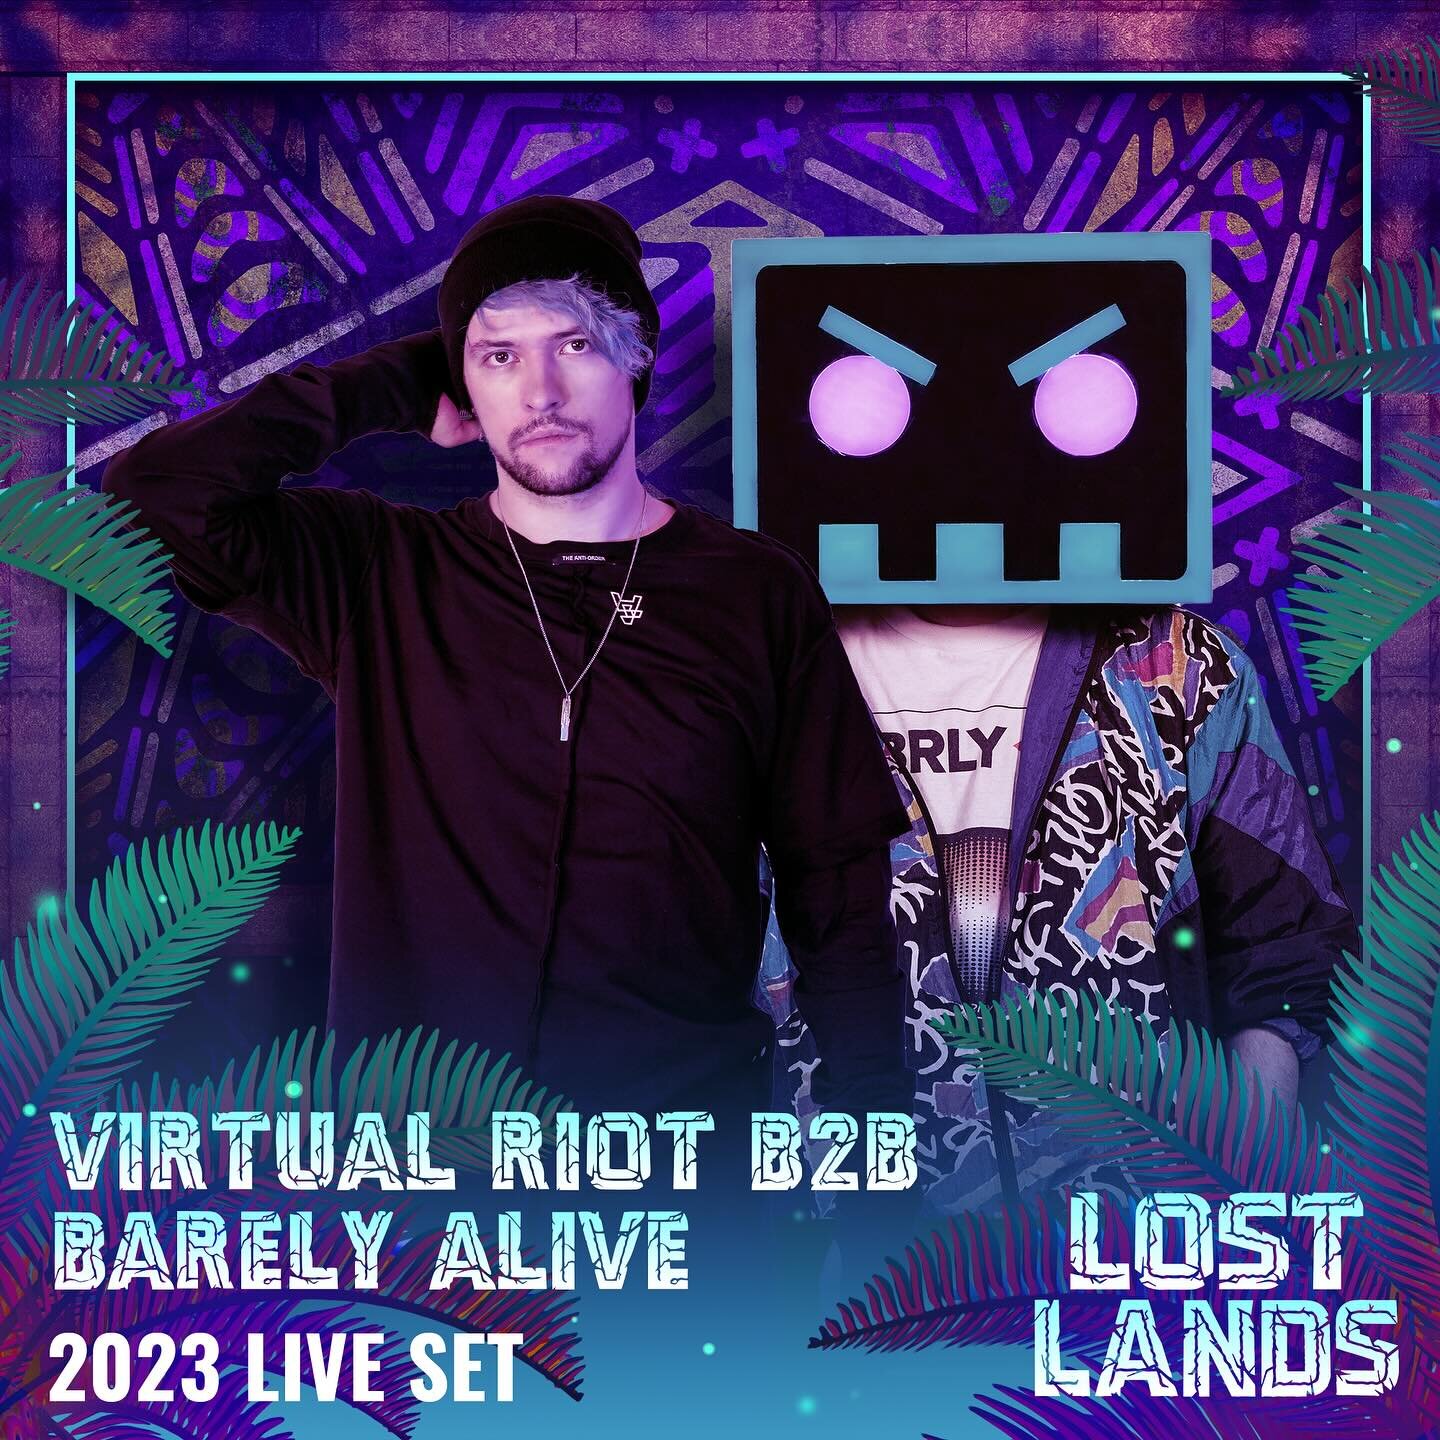 Our Lost lands 2023 set is now on Apple Music for you to enjoy 😊 @barelyalive link in story 
@lostlandsfestival